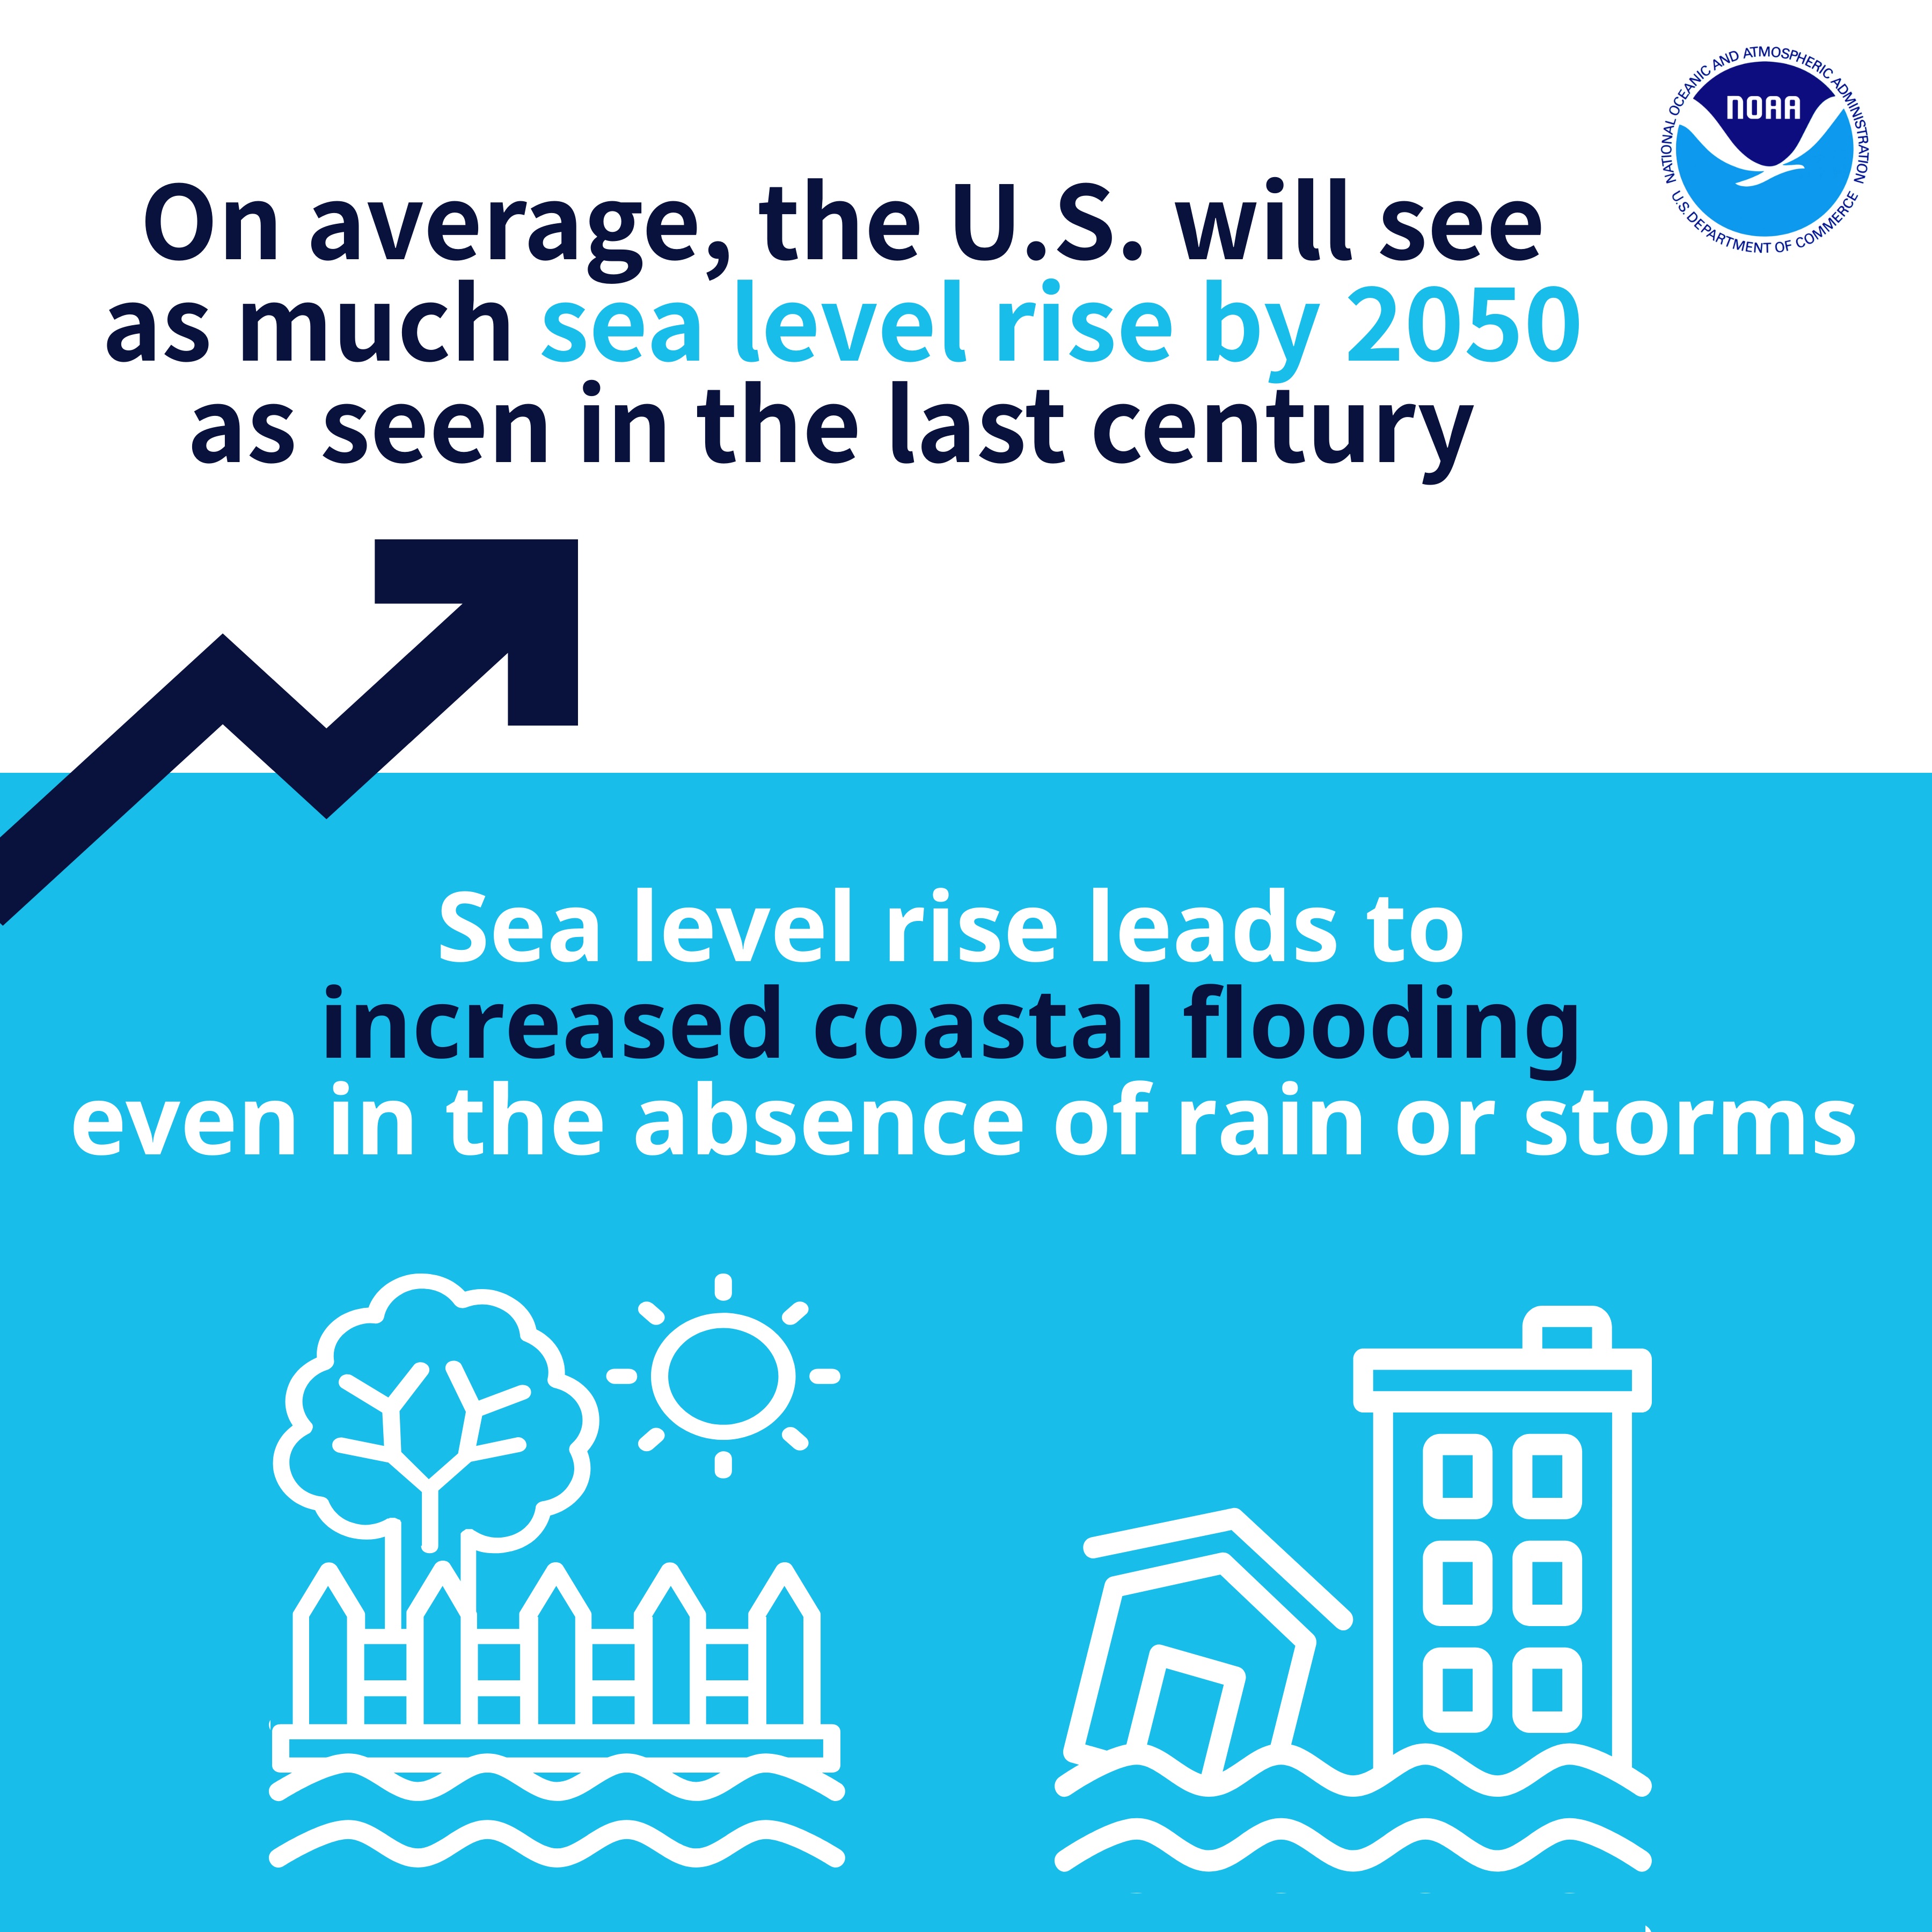 This infographic shows how on average, the U.S. will see as much sea level rise by 2050 as seen in the last century. Sea level rise leads to increased coastal flooding, even in the absence of heavy rain or storms.